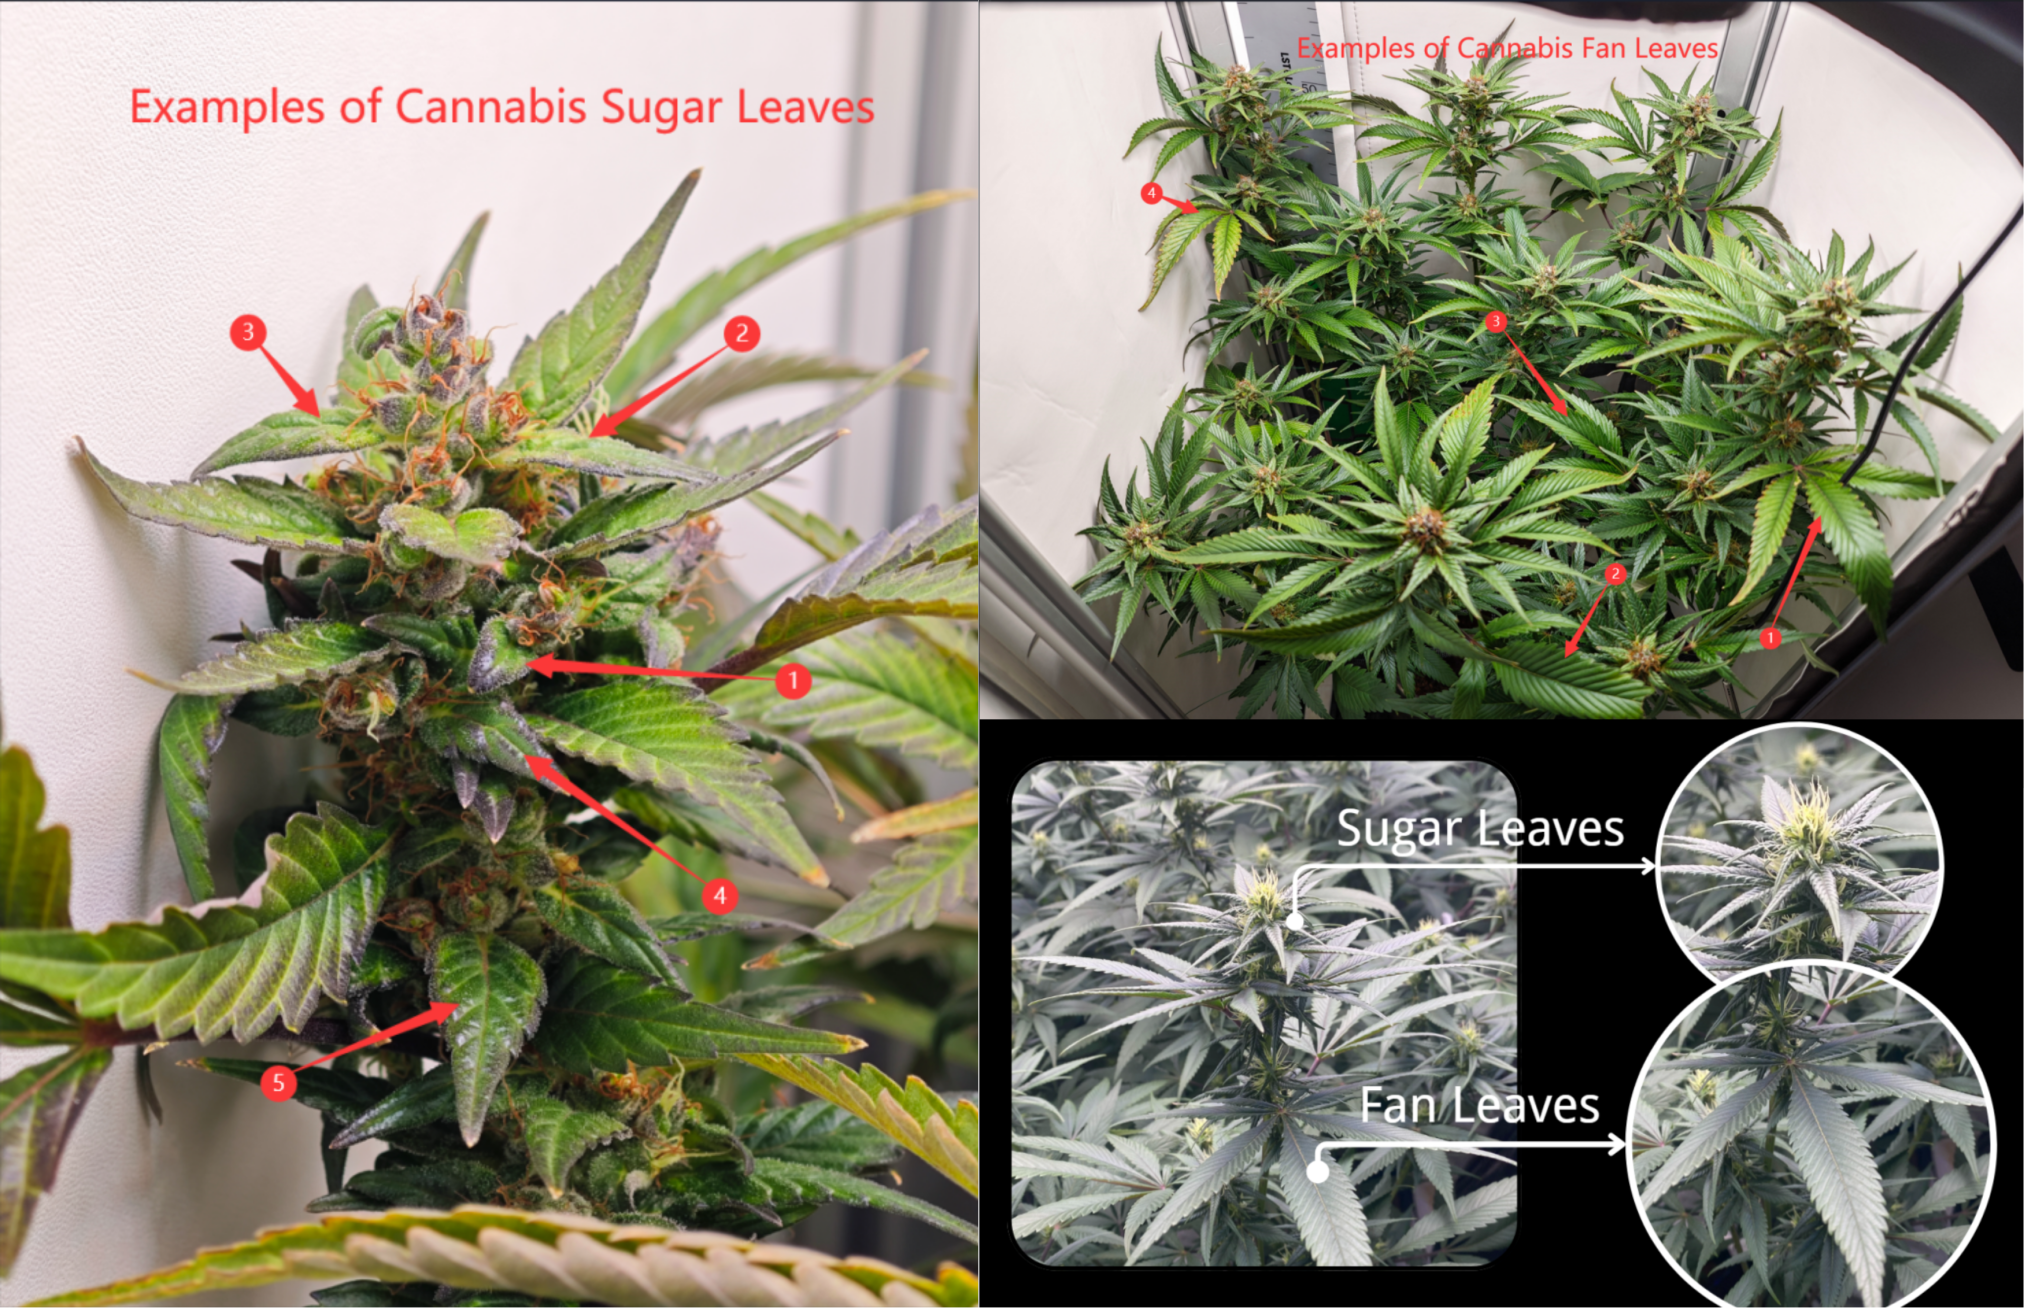 Difference between sugar leaves and fan leaves